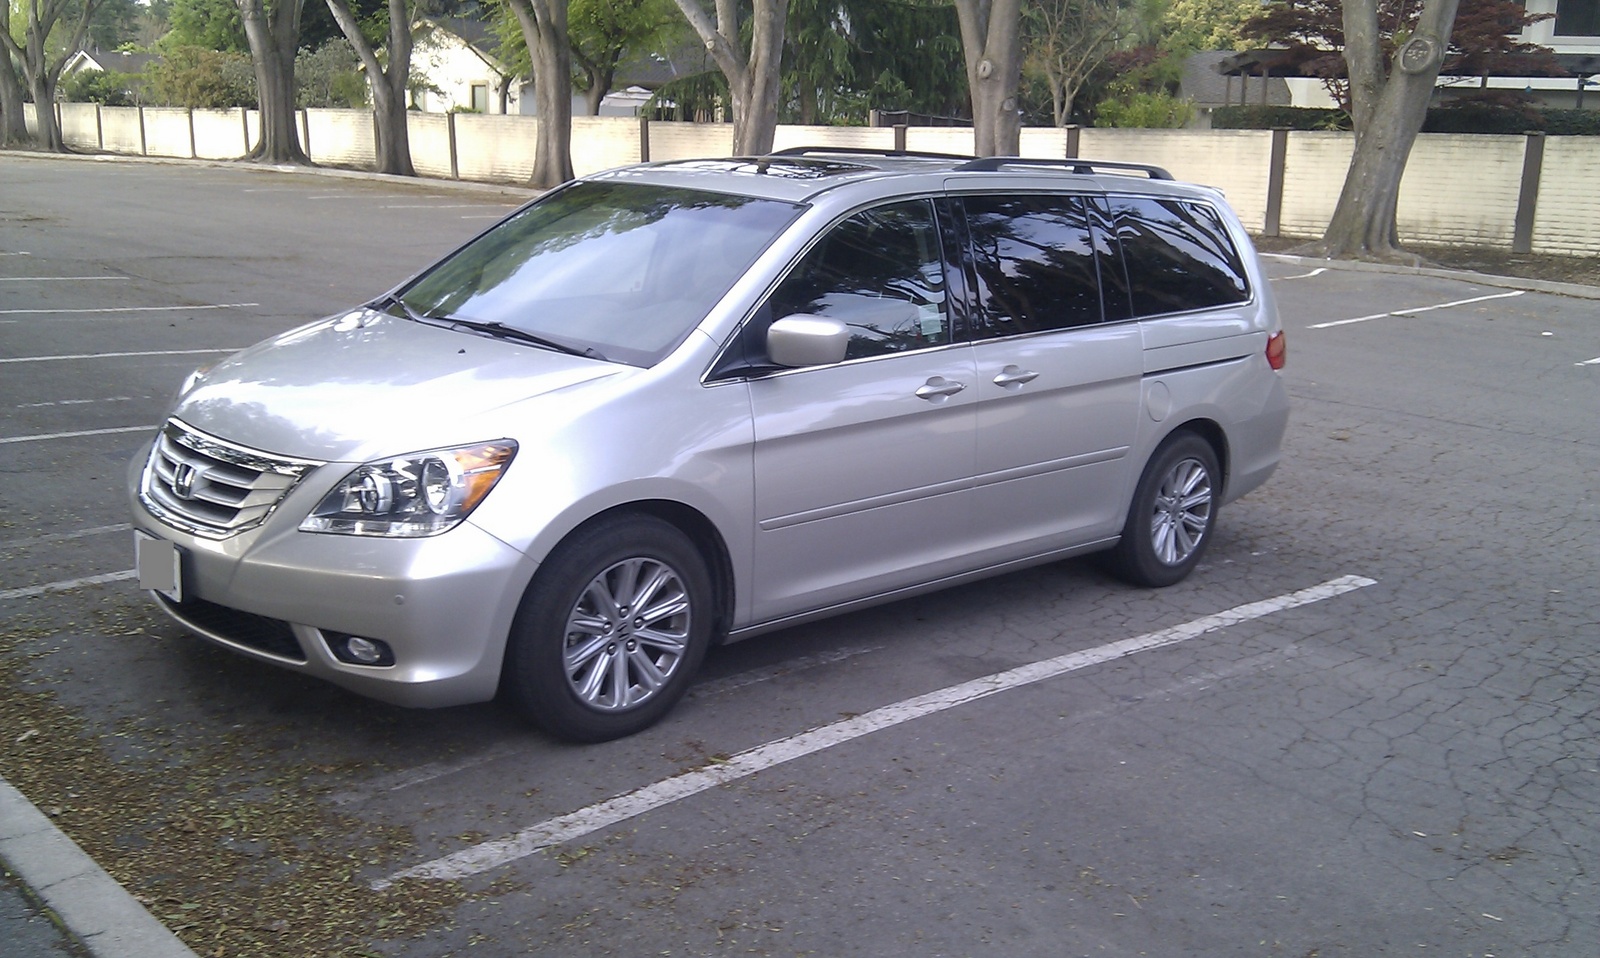 2009 Honda odyssey touring with pax #1